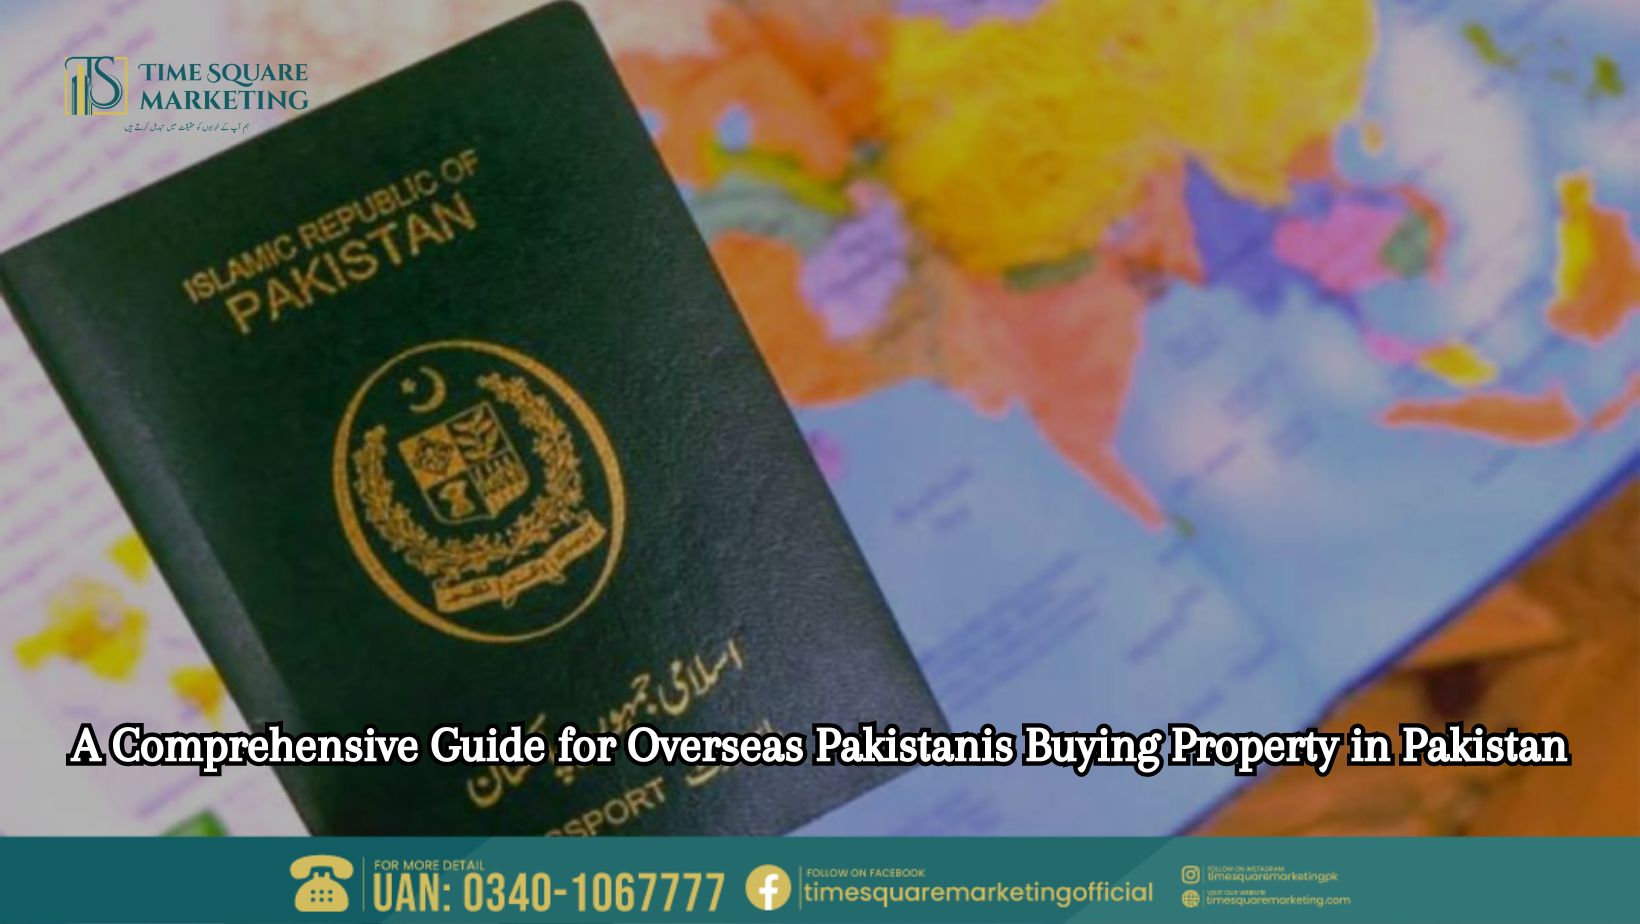 A Comprehensive Guide for Overseas Pakistanis Buying Property in Pakistan